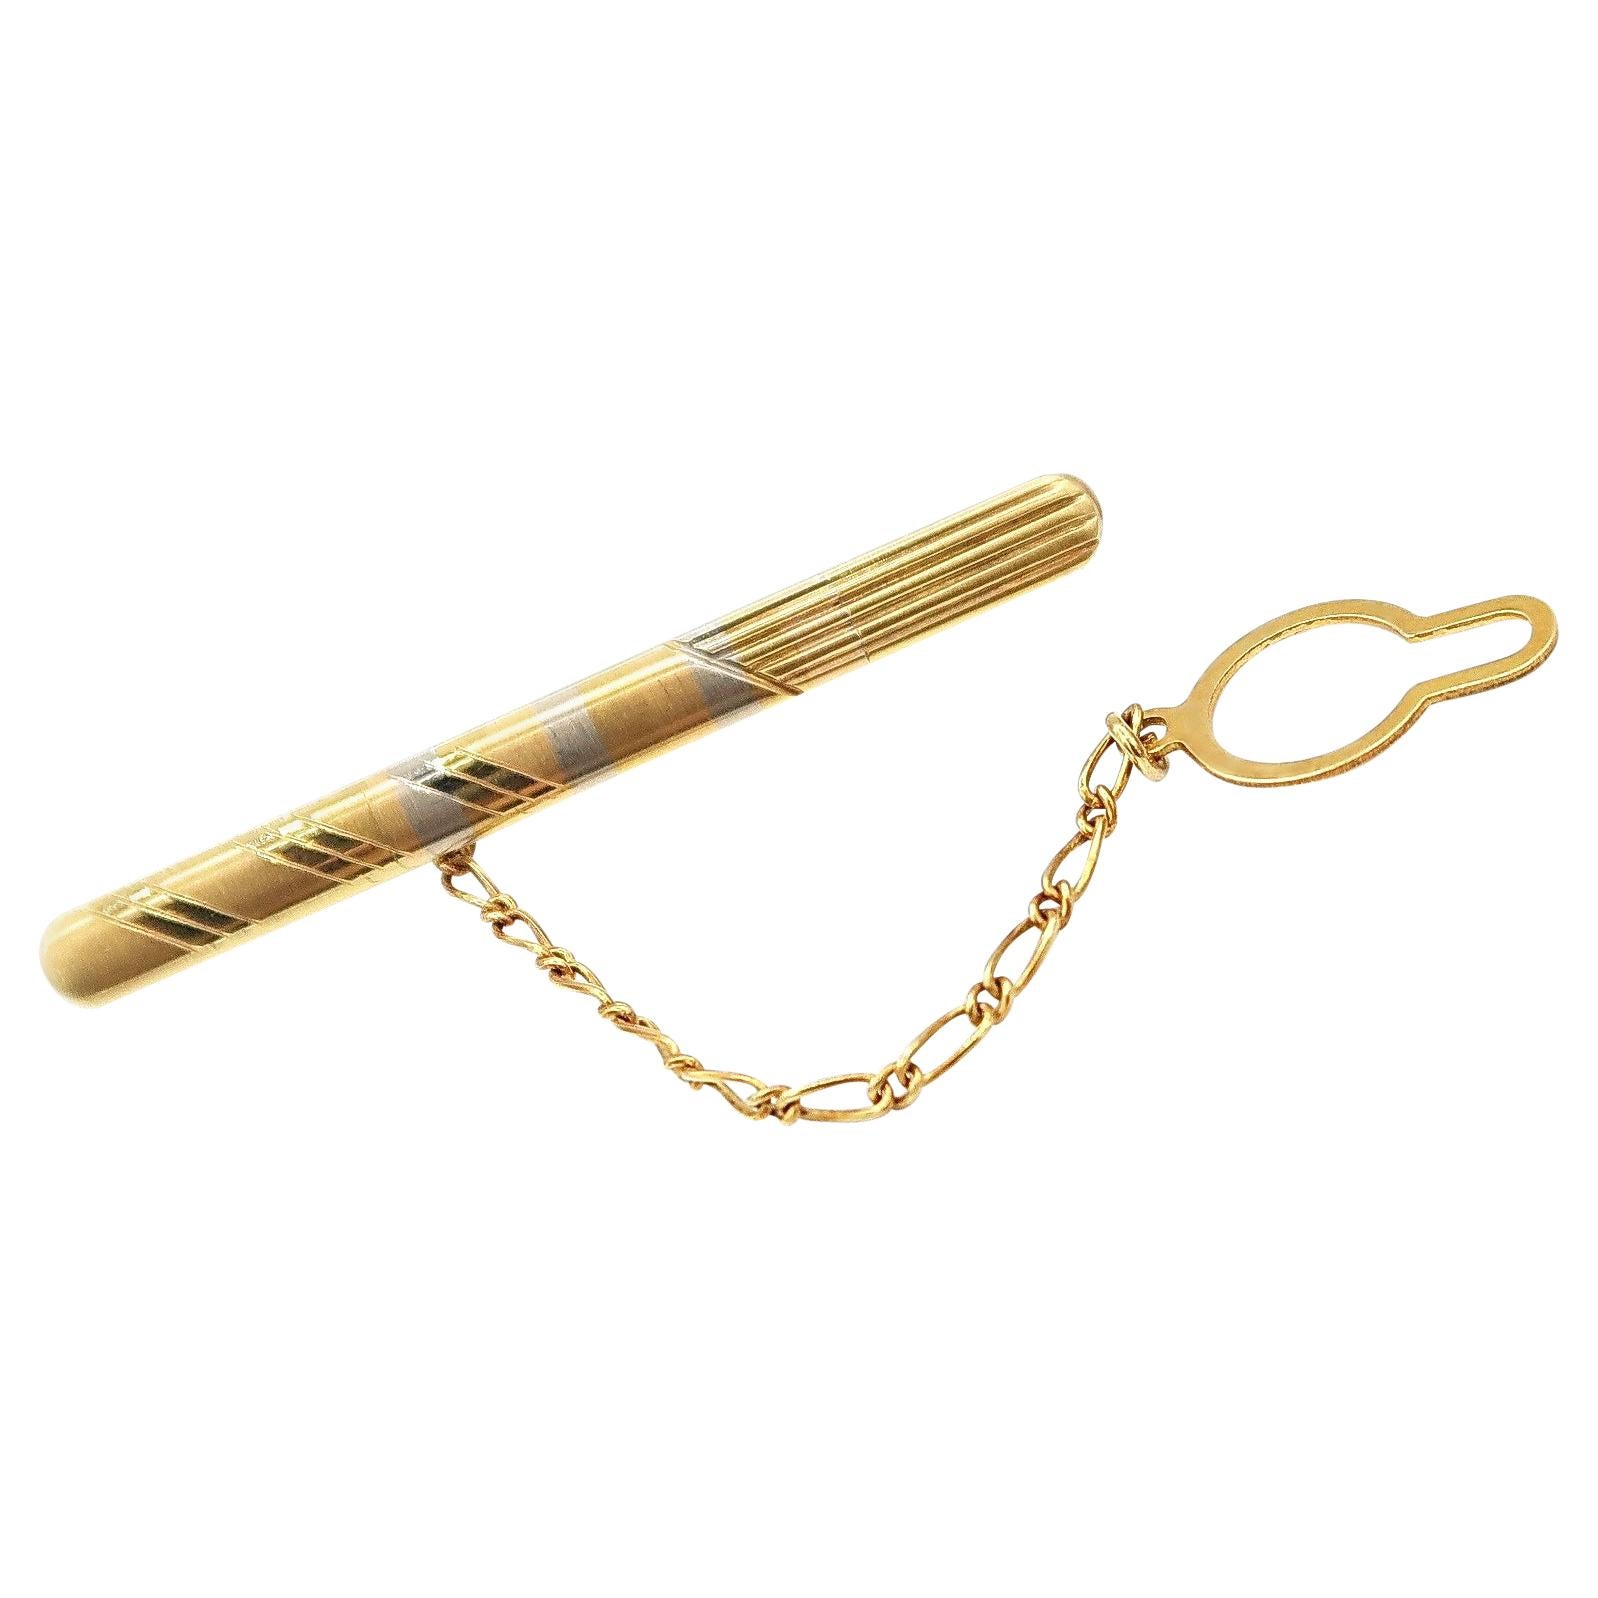 Multitextured Brushed Shiny Rounded End Fluted 18k Gold Tie Bar Clip with Chain For Sale